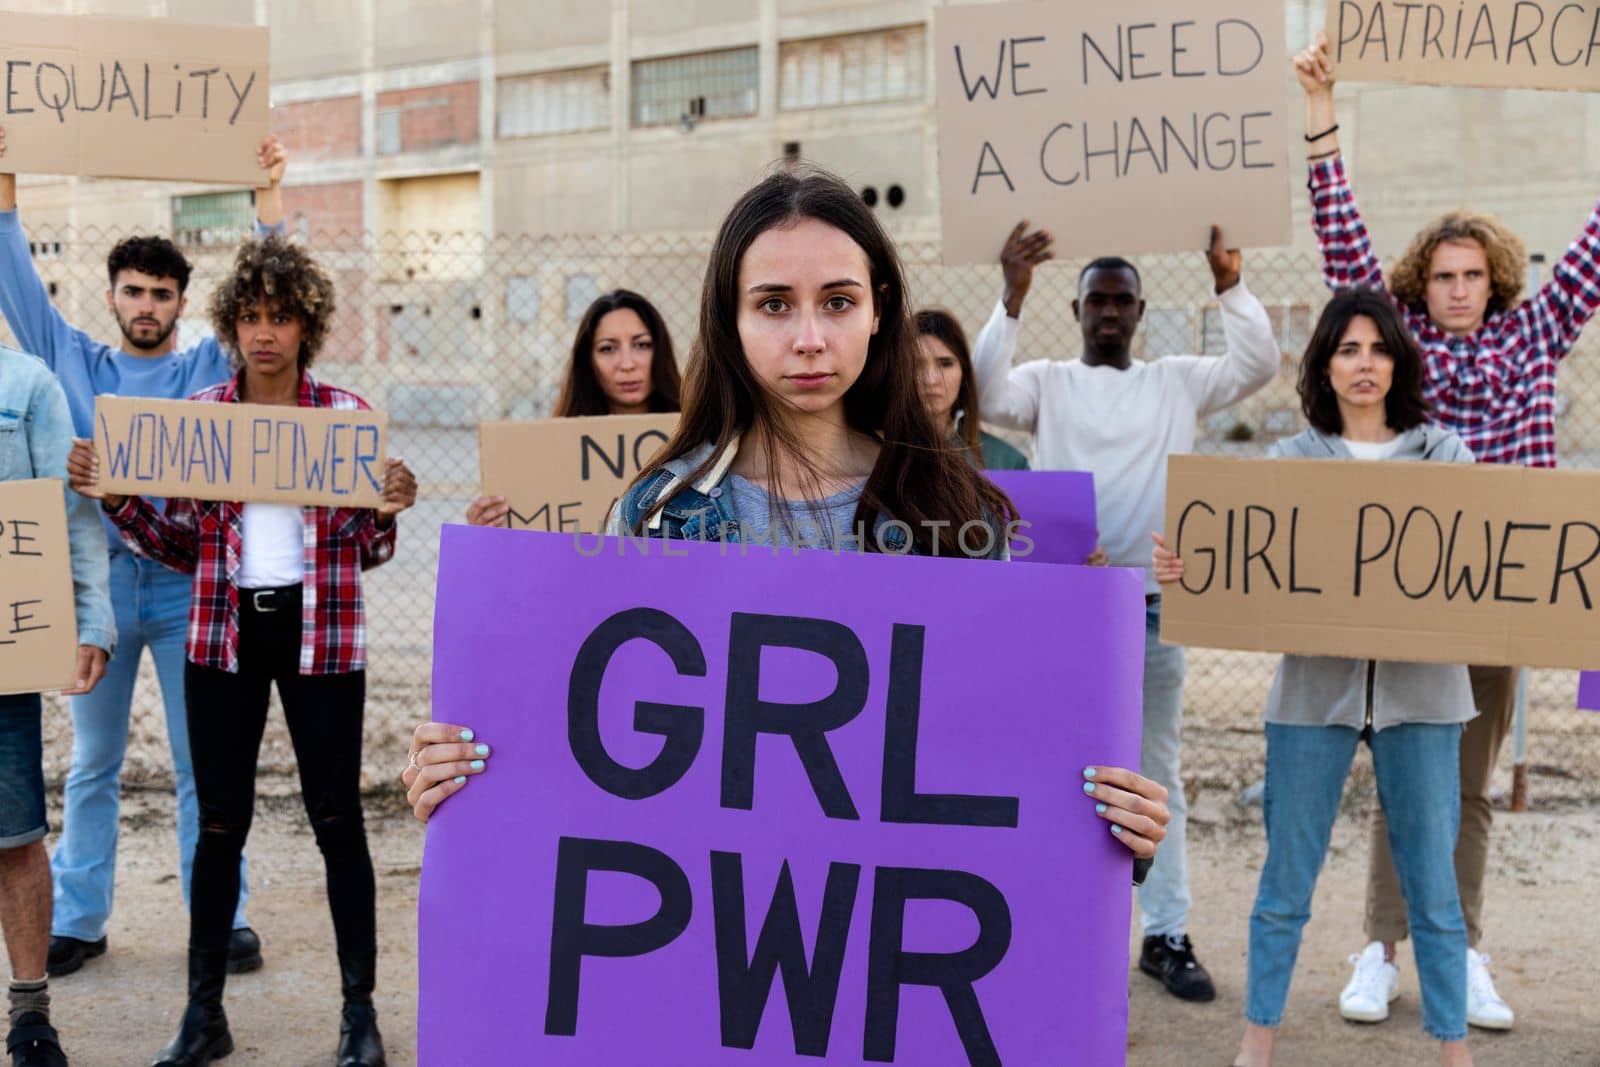 Young woman holding a girl power sign in demonstration for equality and woman's rights. Protesters in the background. by Hoverstock